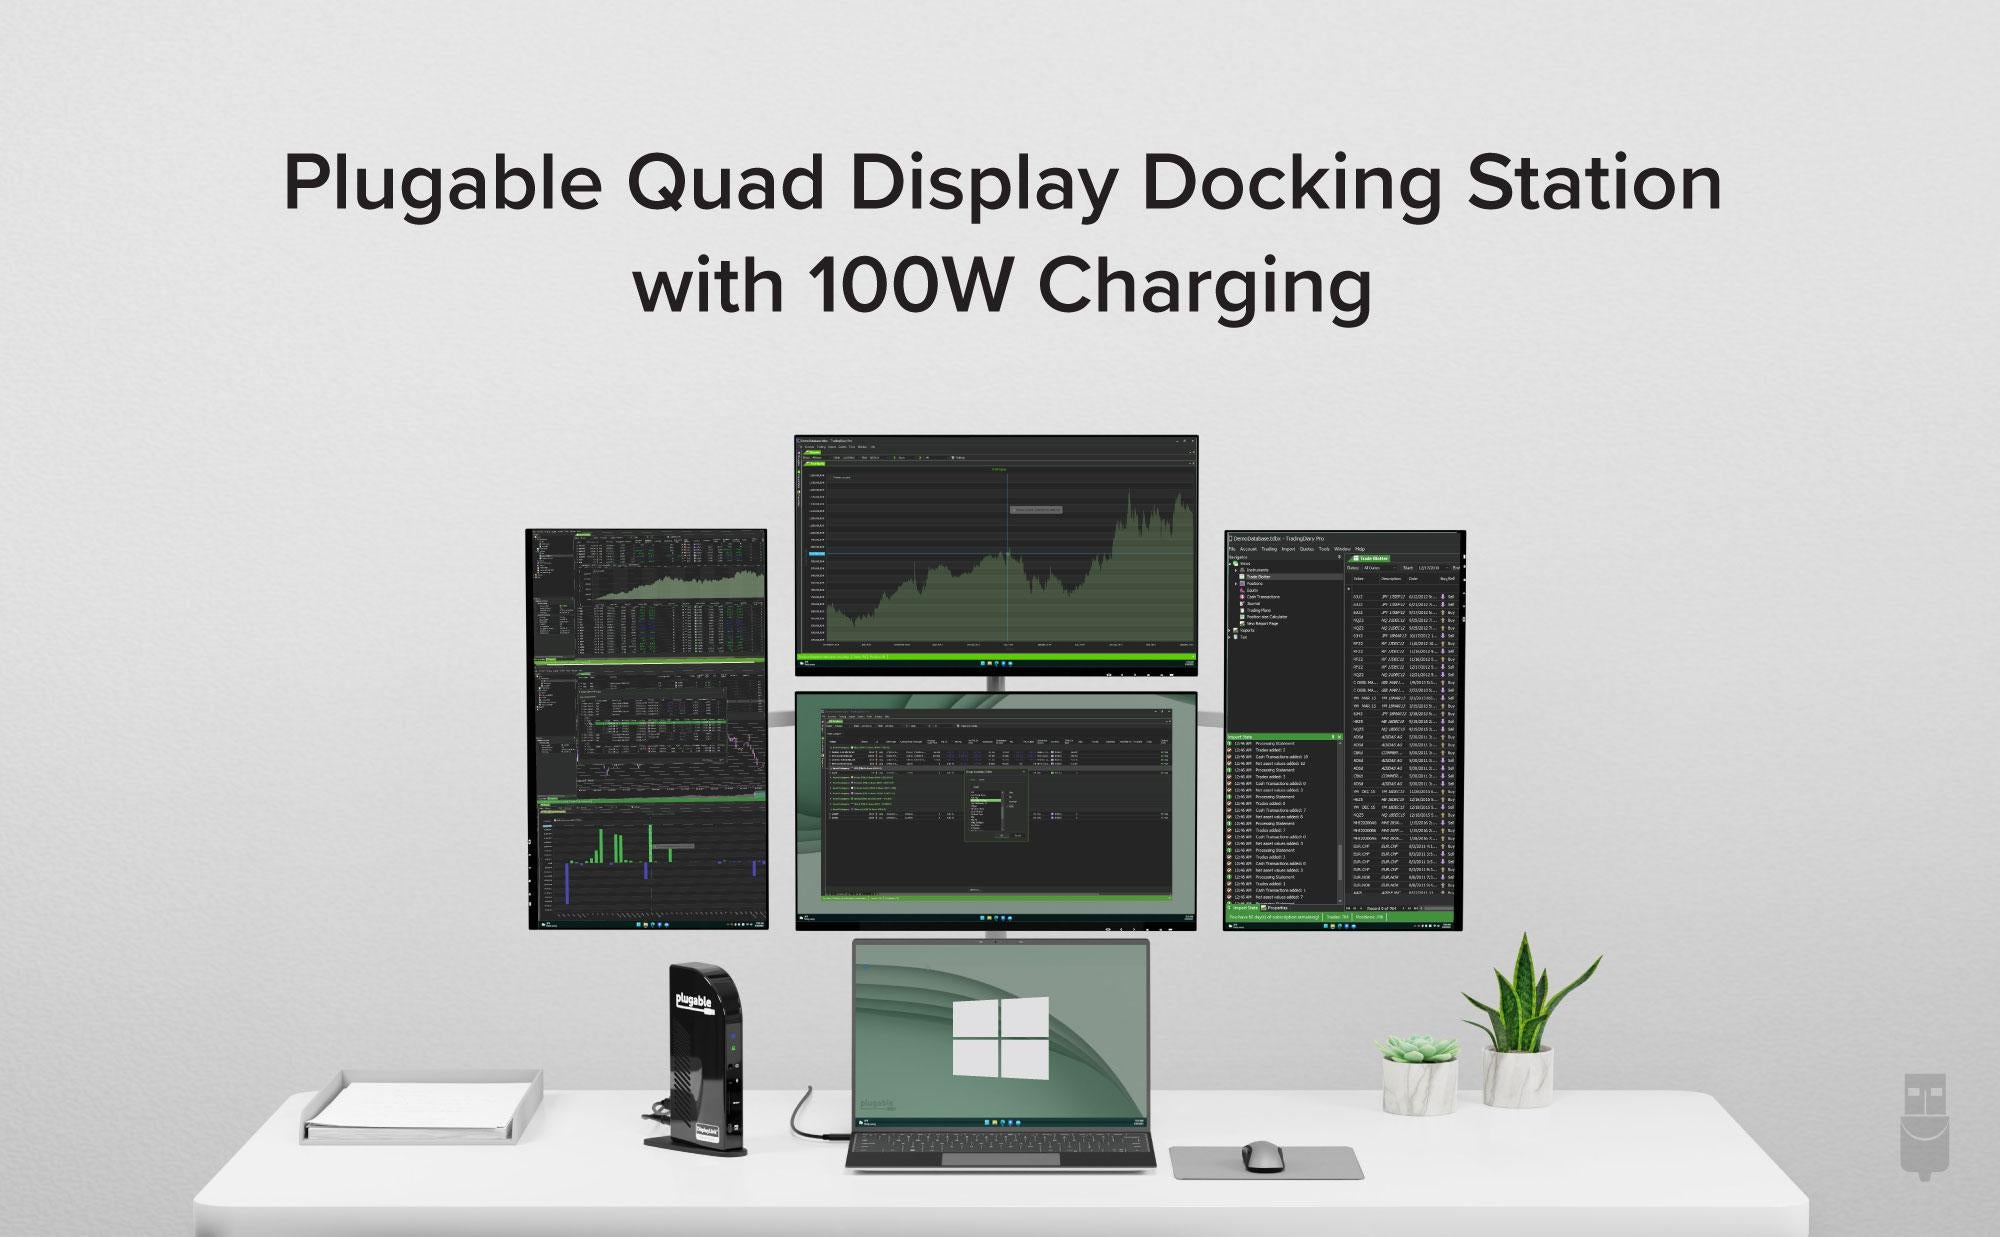 A single Windows laptop connected to four 1080P displays using the UD-3900C4 docking station.